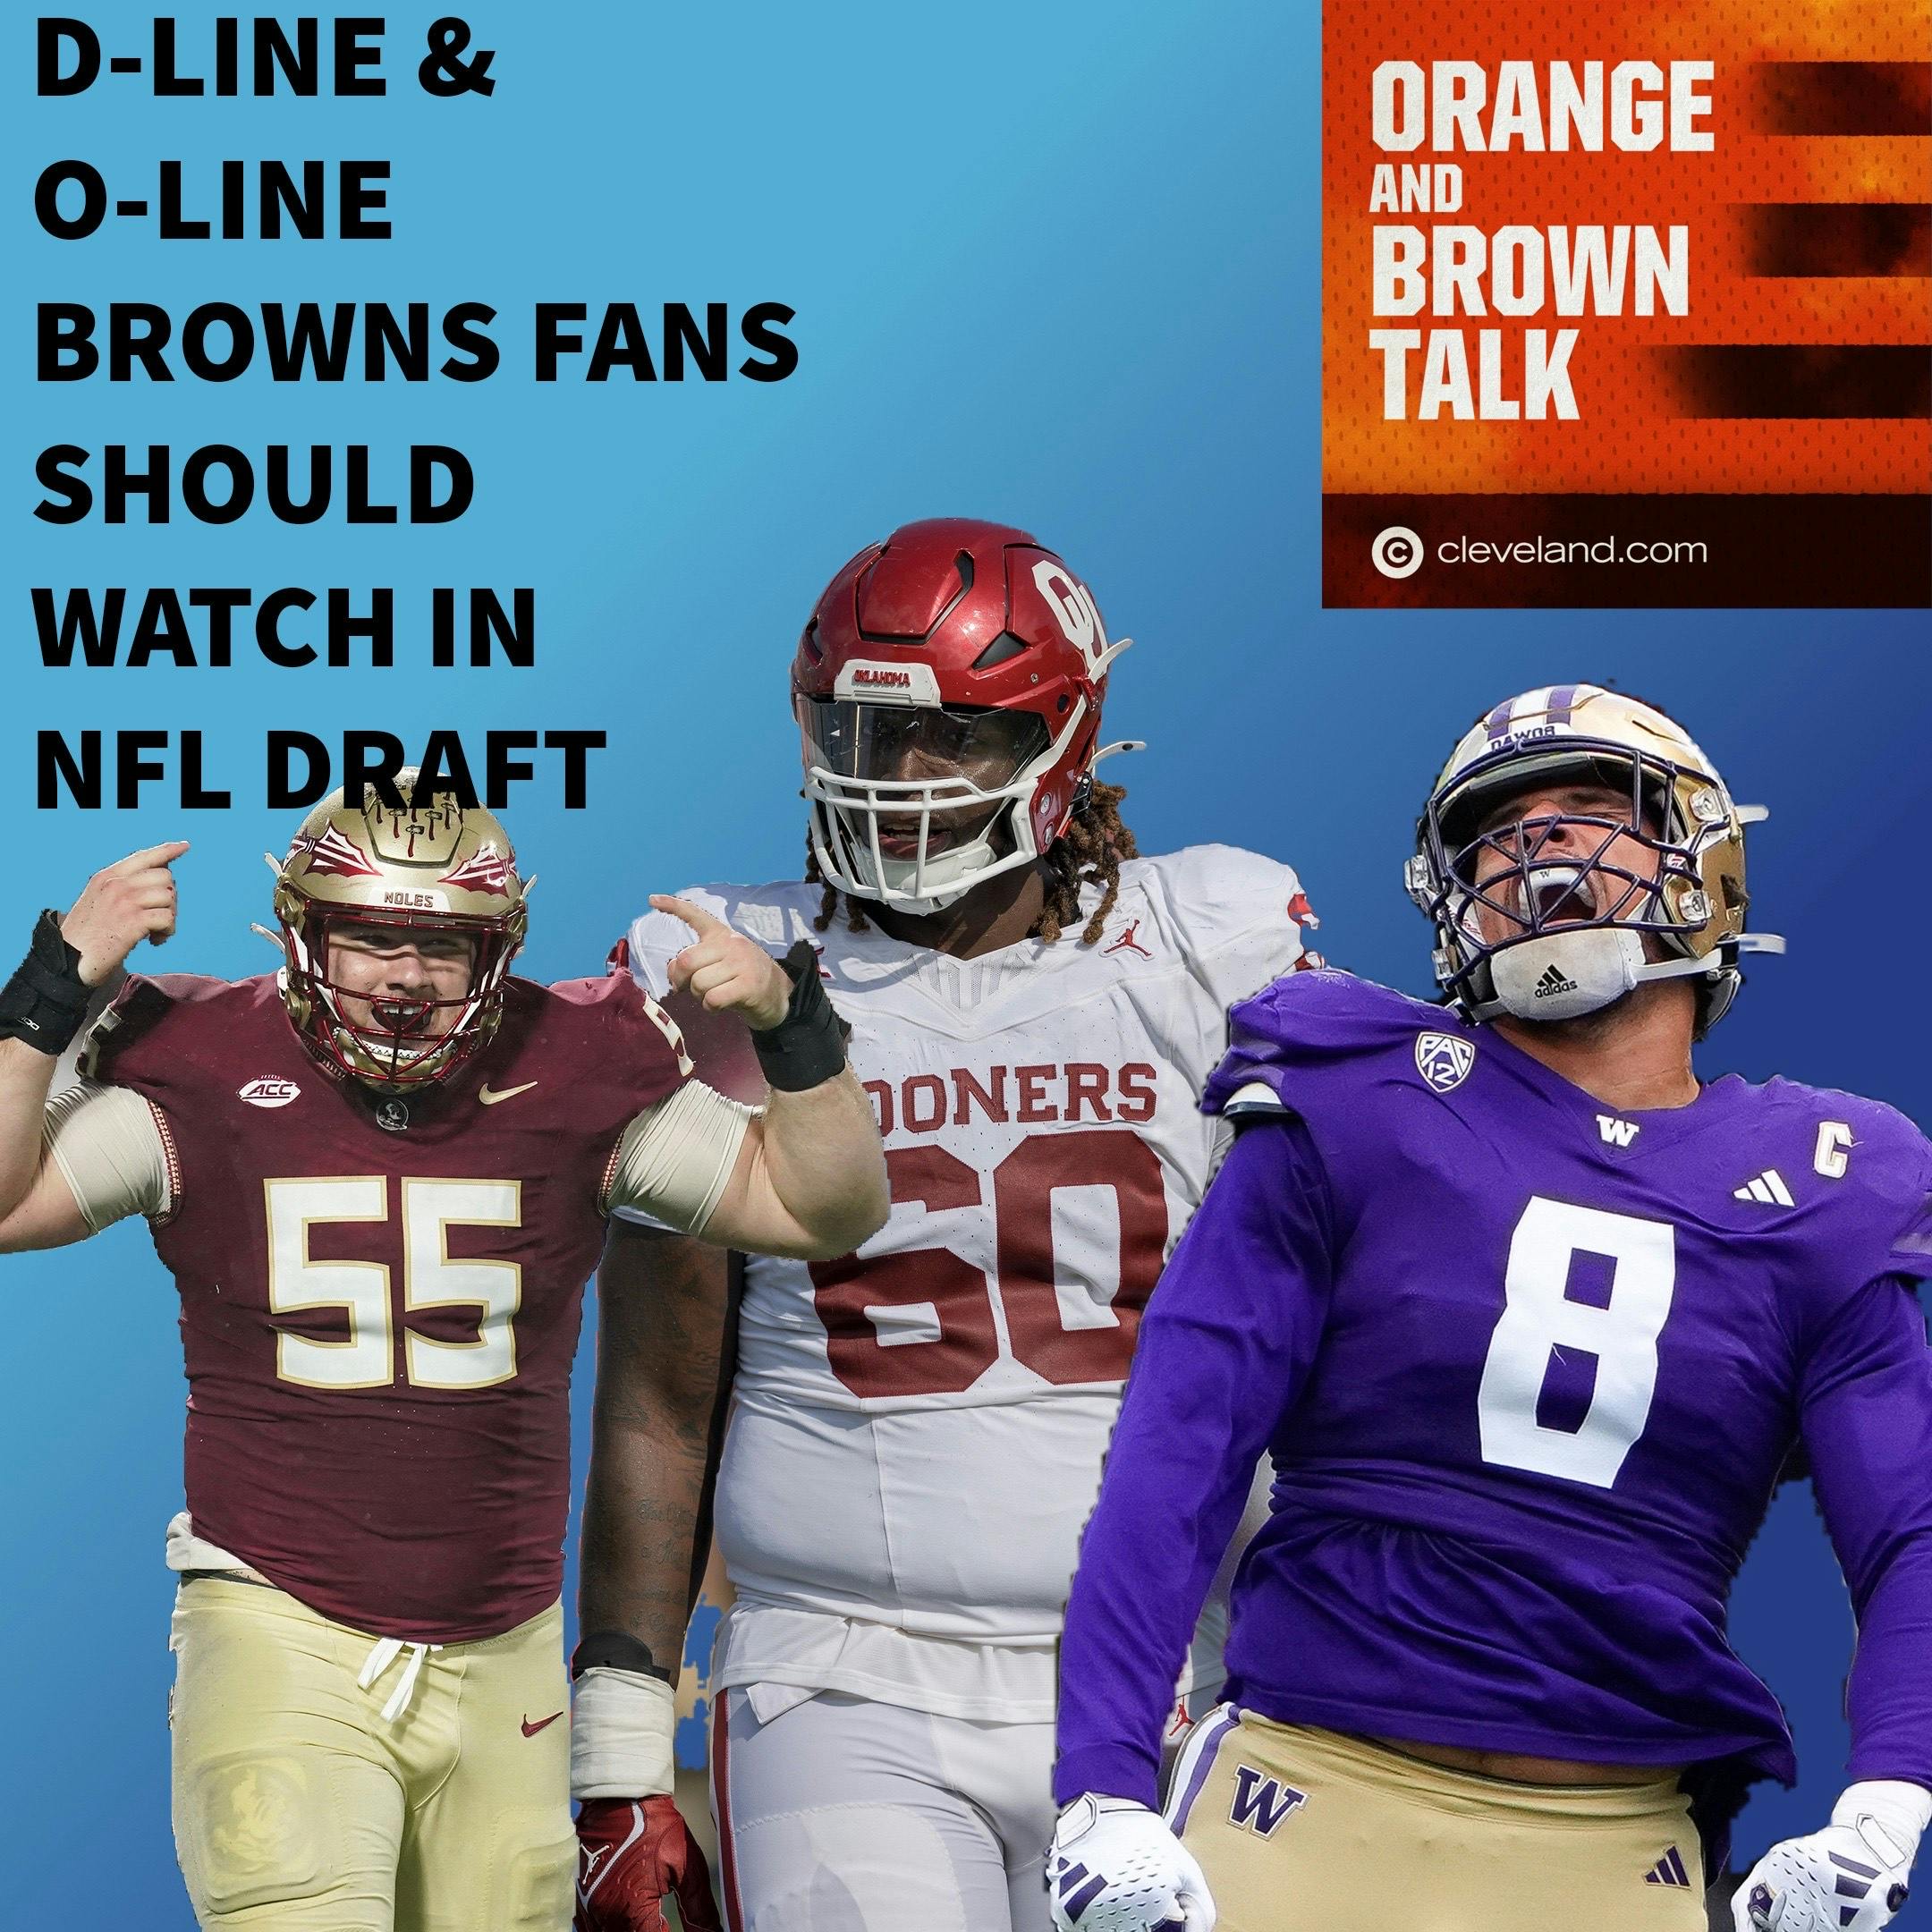 D-line and O-line fits for the Browns in the NFL Draft with Lance Reisland